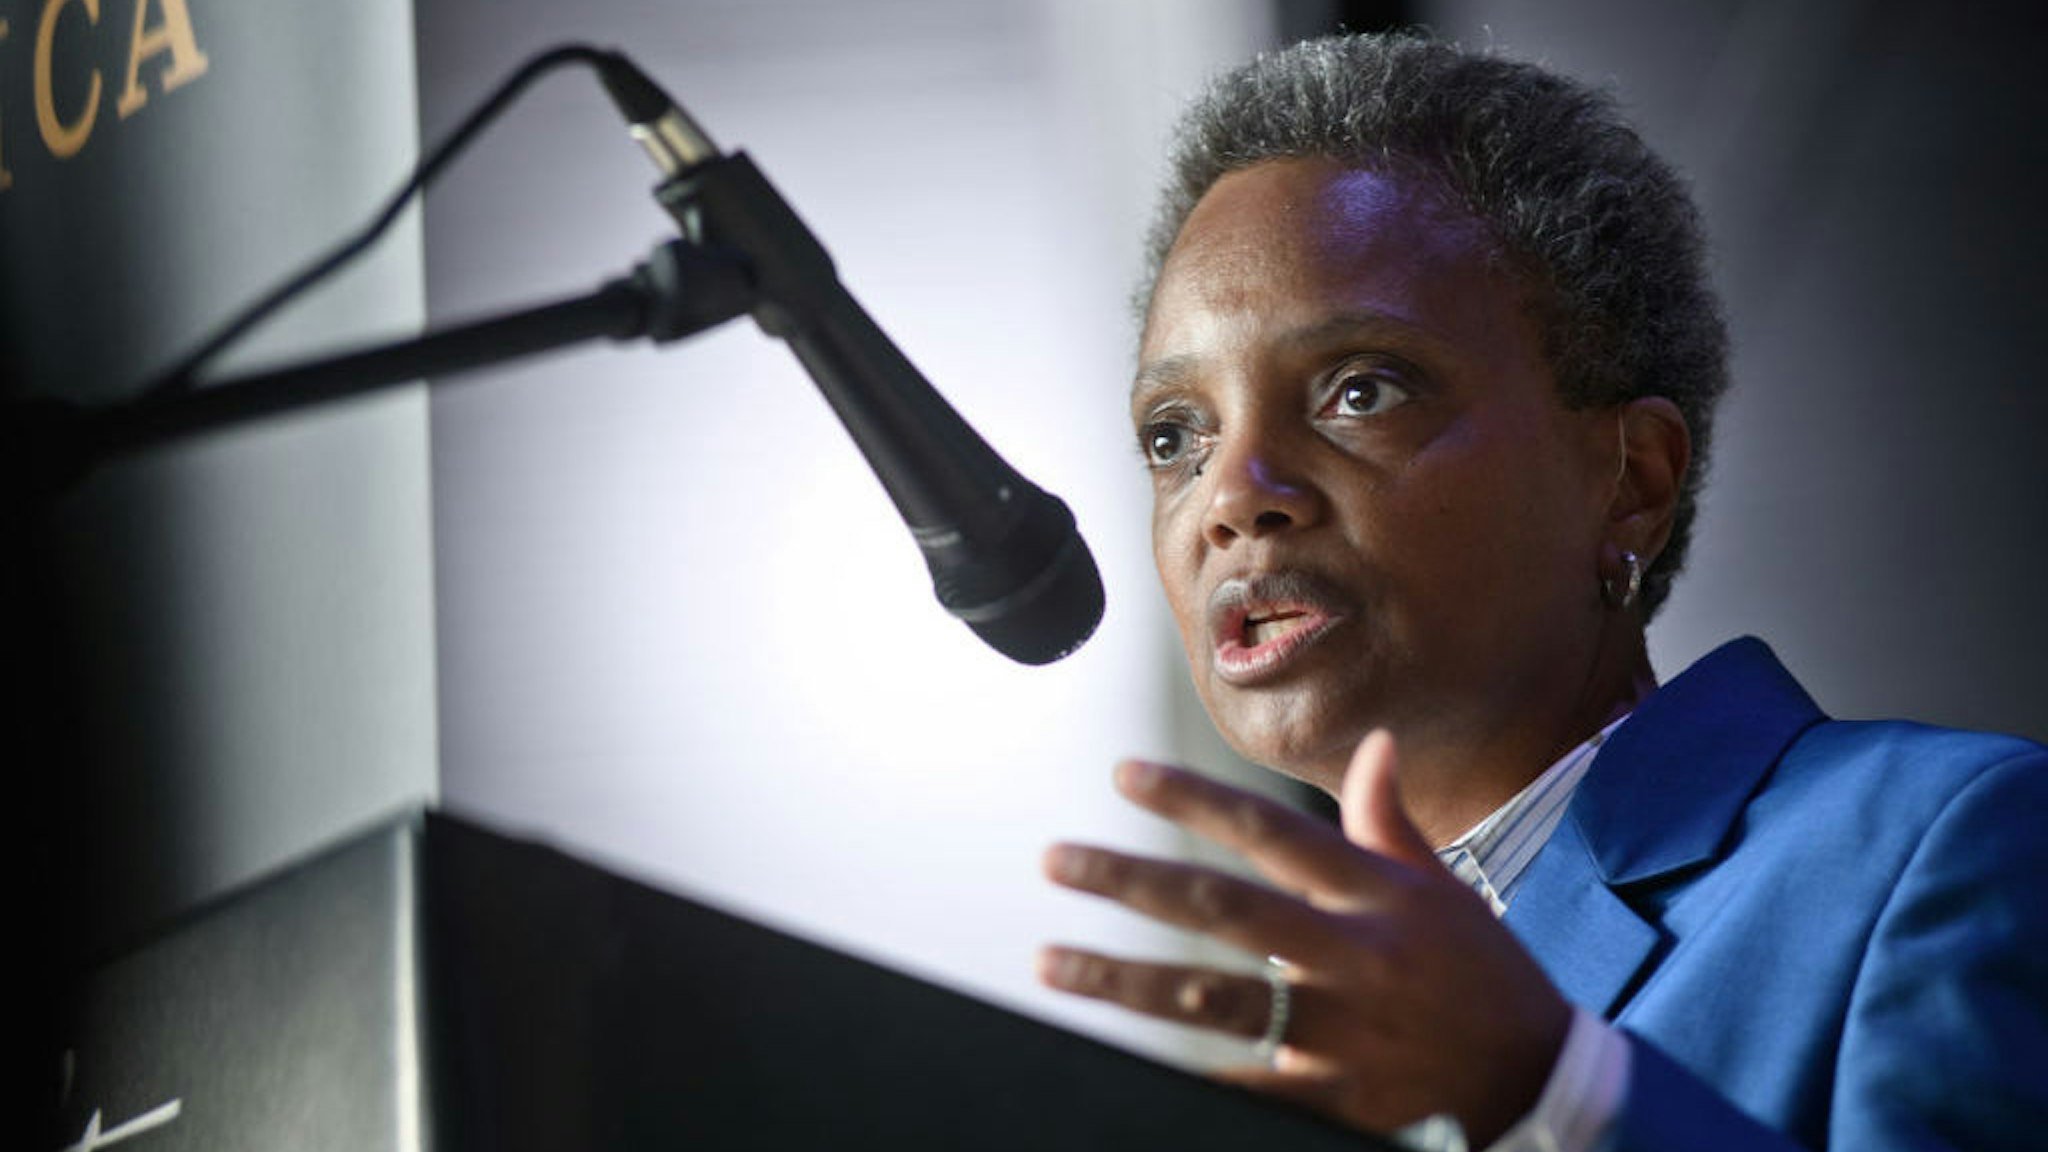 CHICAGO, IL - APRIL 26: Chicago Mayor-Elect Lori Lightfoot attends the Hamilton: The Exhibition world premiere at Northerly Island on April 26, 2019 in Chicago, Illinois. (Photo by Timothy Hiatt/Getty Images)